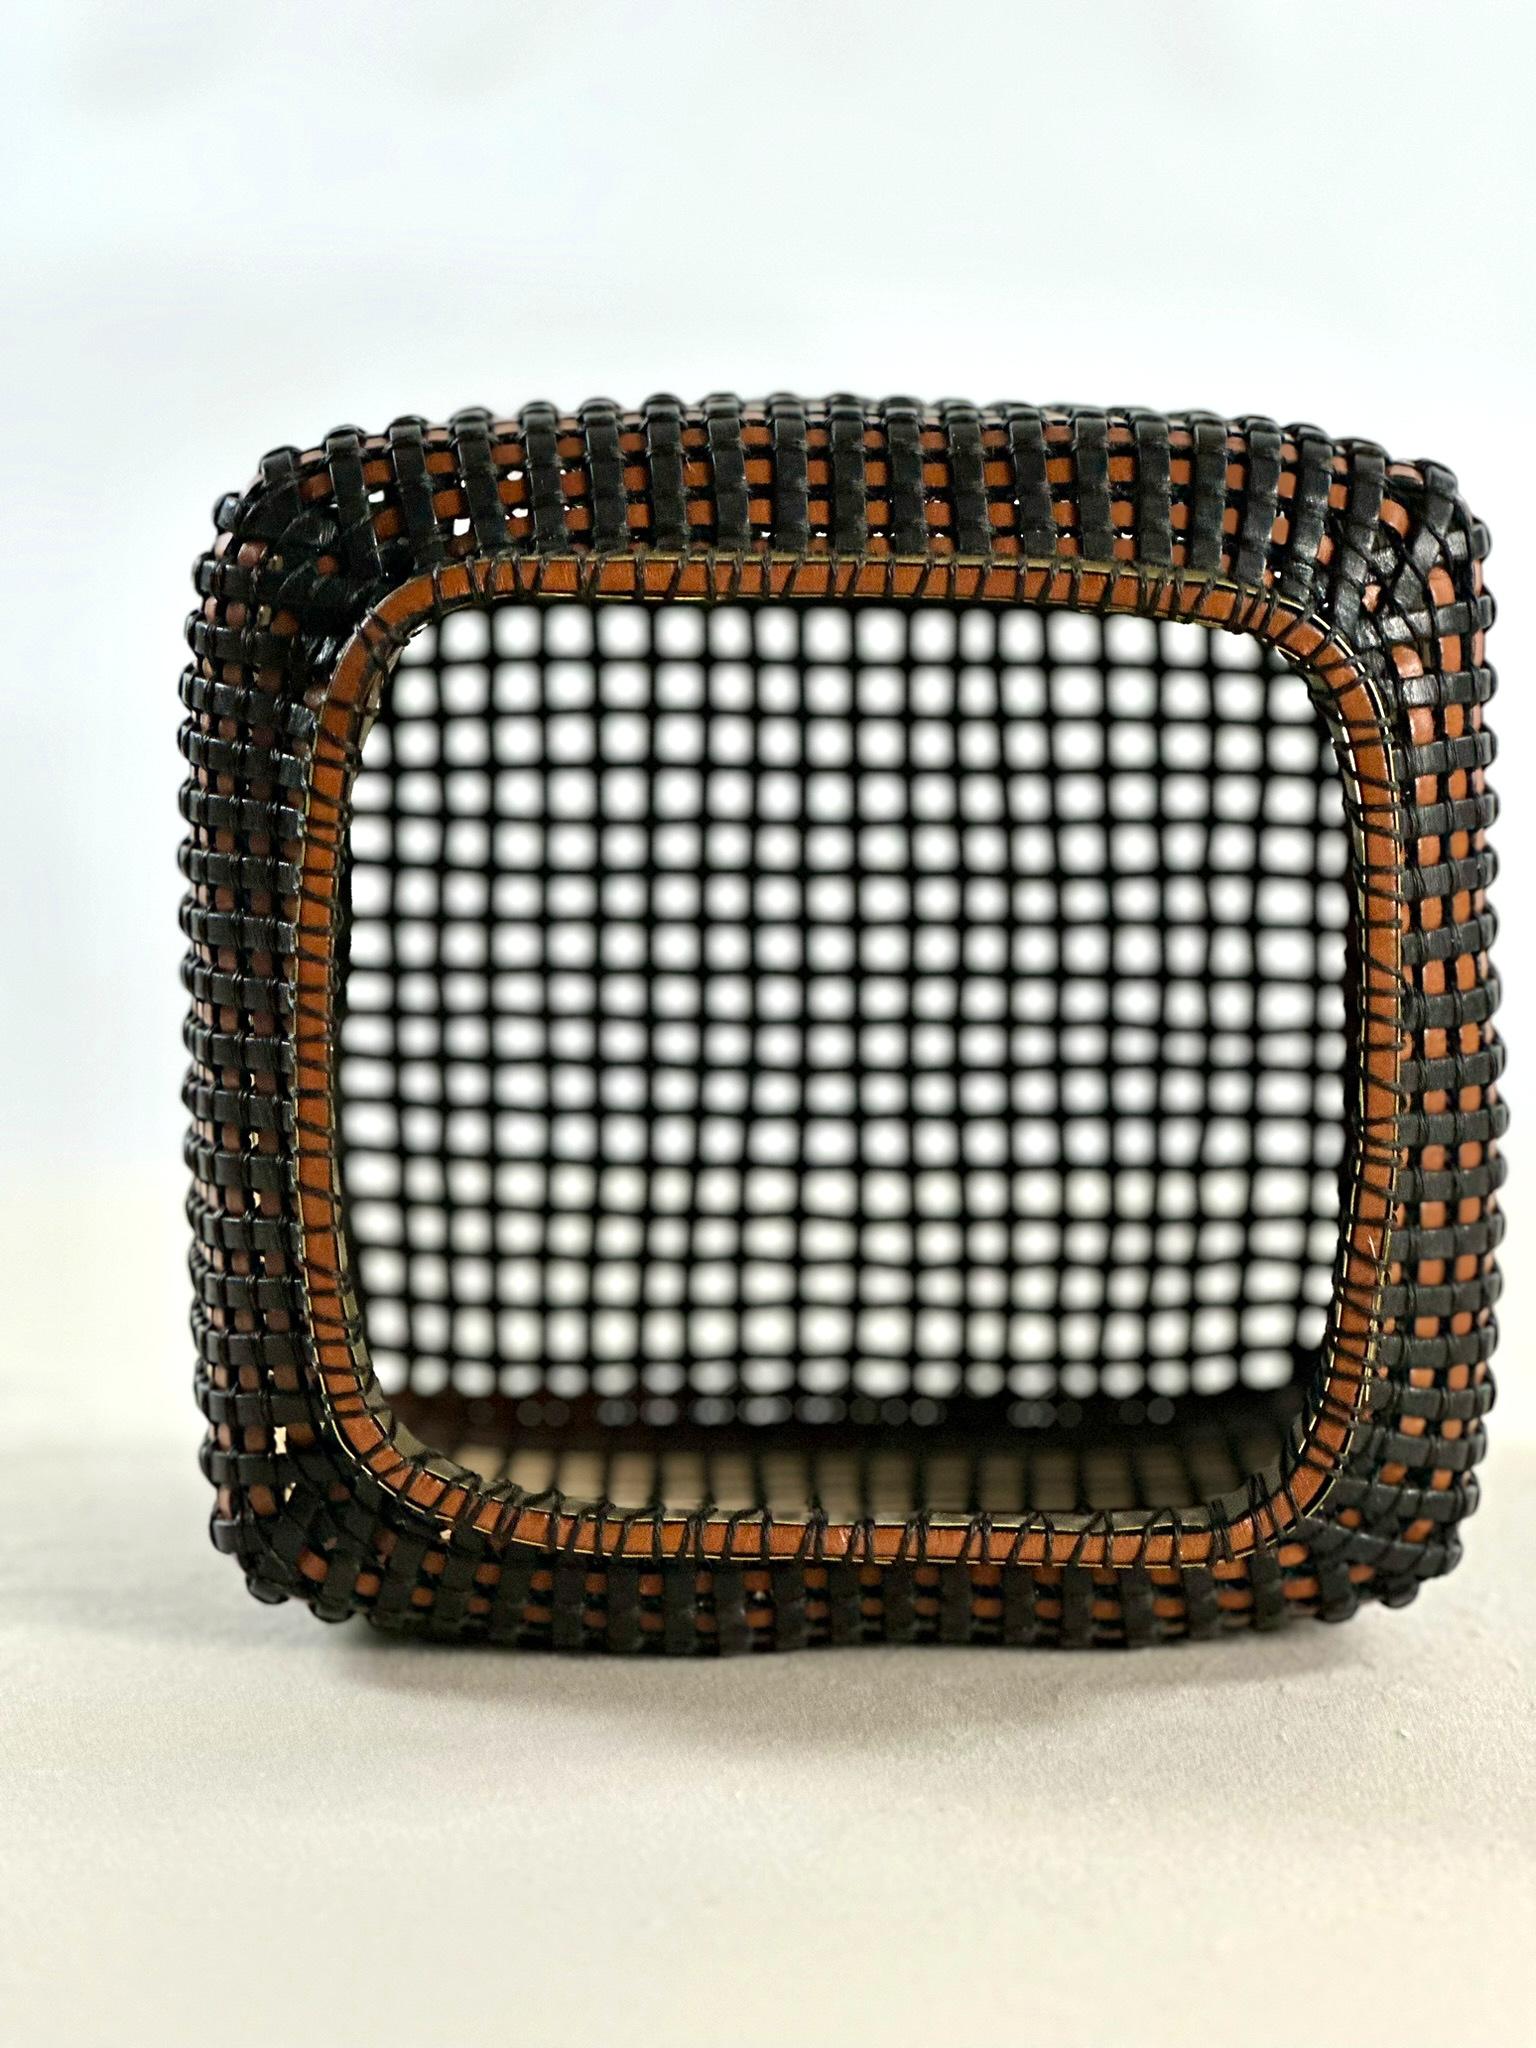 Hand-Woven Chinese Tibor Inspired Leather & Cane Handmade Basket Black, Tan & Ivory Color For Sale